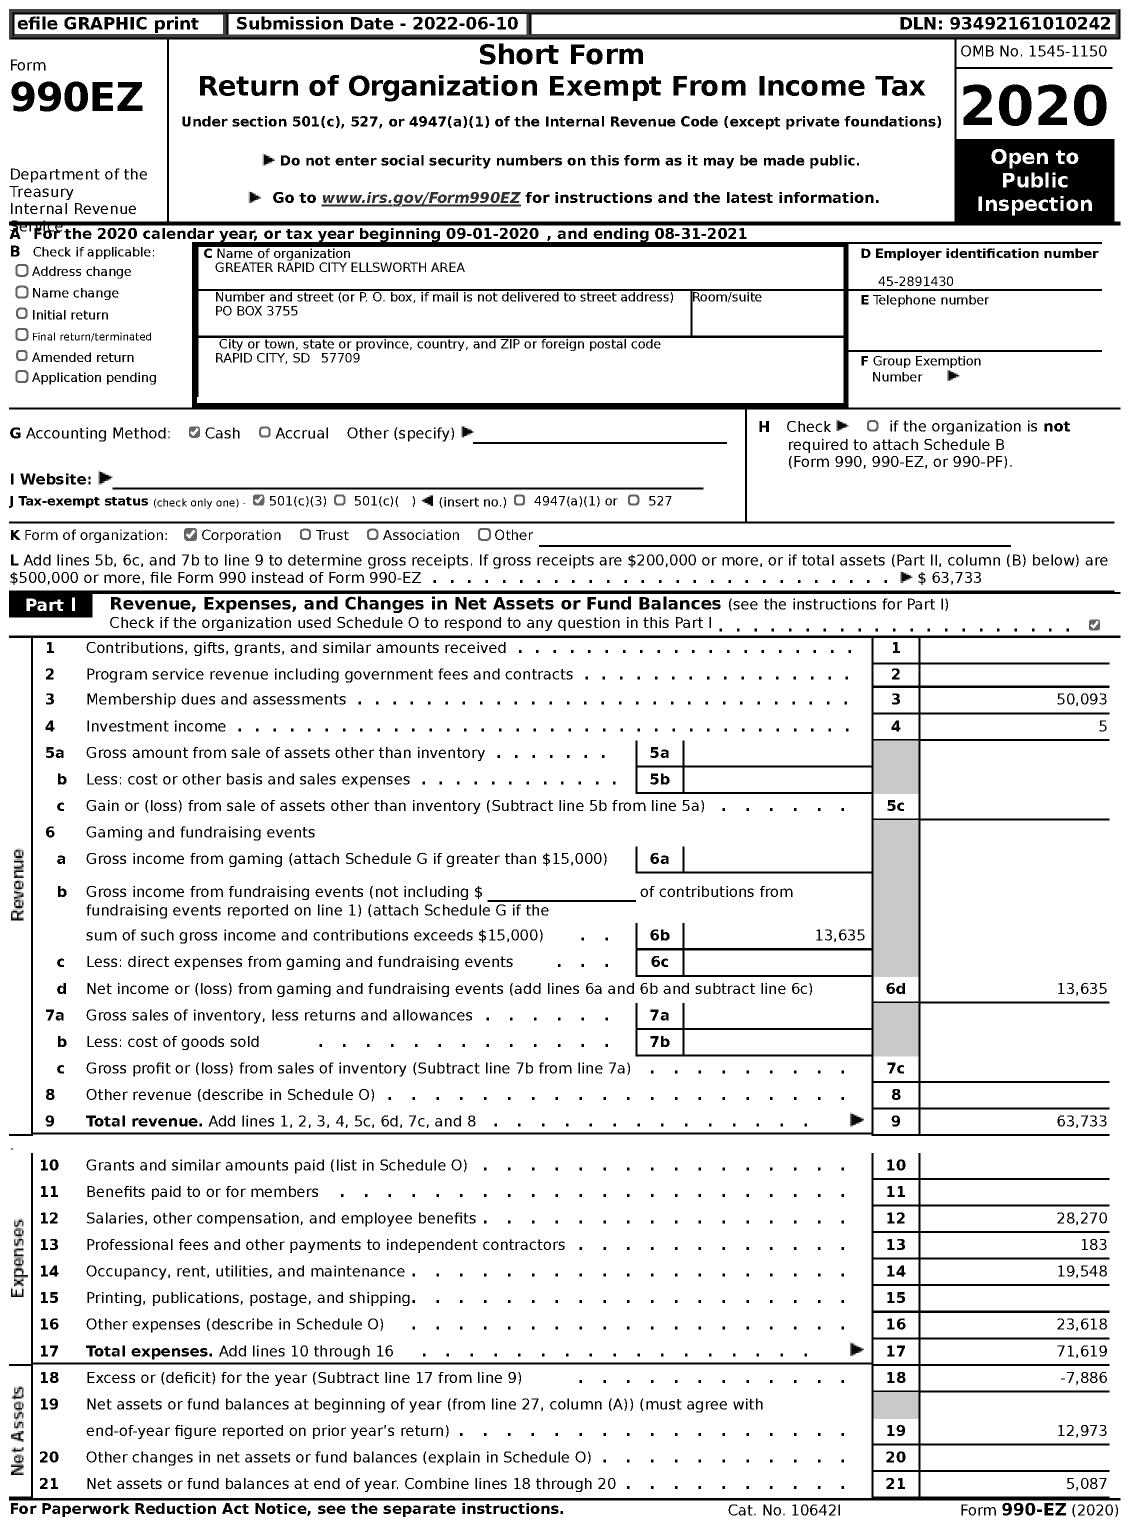 Image of first page of 2020 Form 990EZ for Greater Rapid City Ellsworth Area